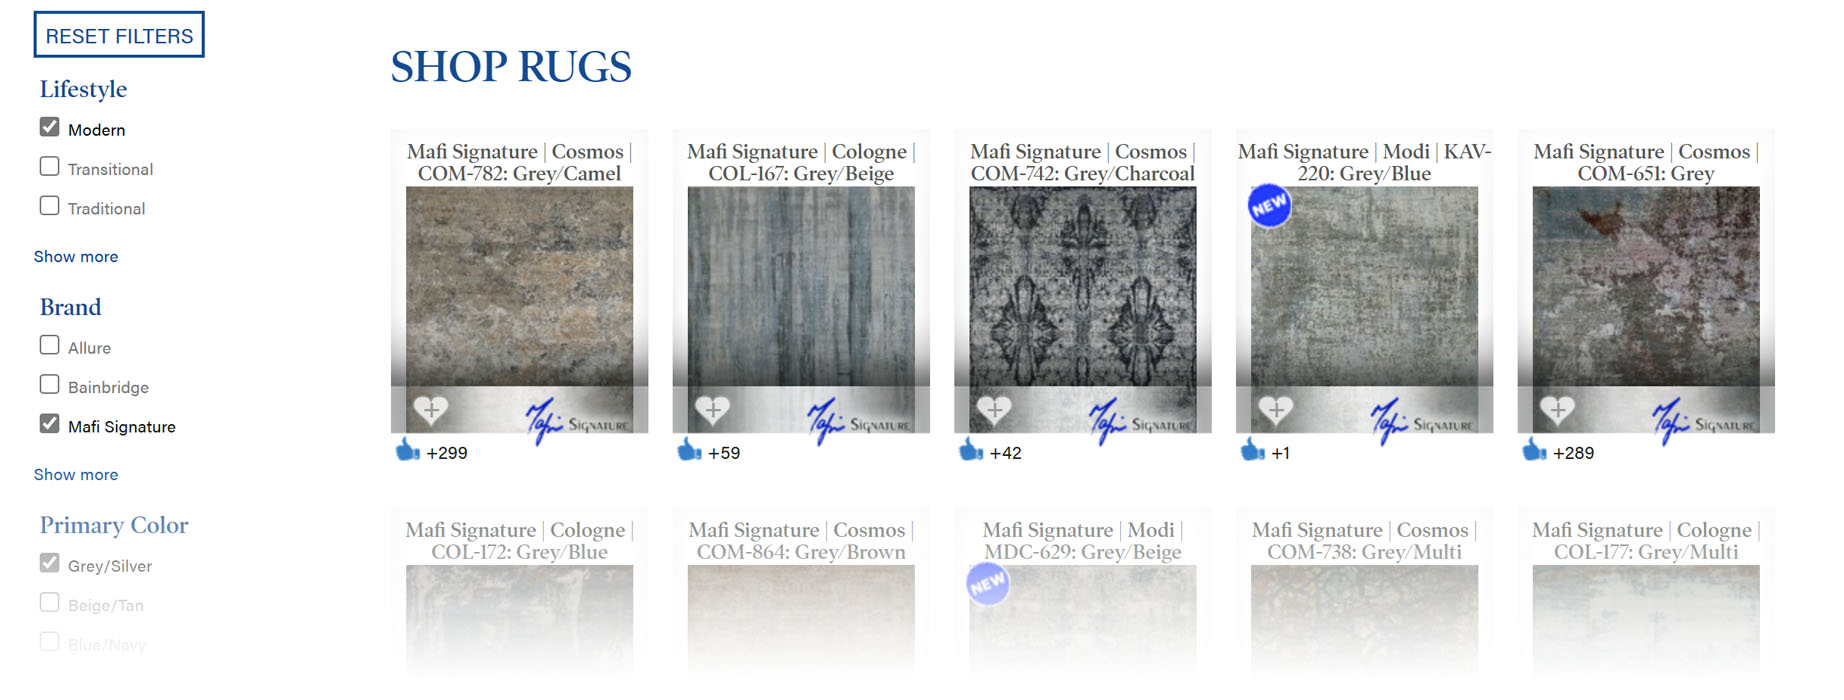 You can use multiple filters to find the best rug possible at MafiRugs.com.